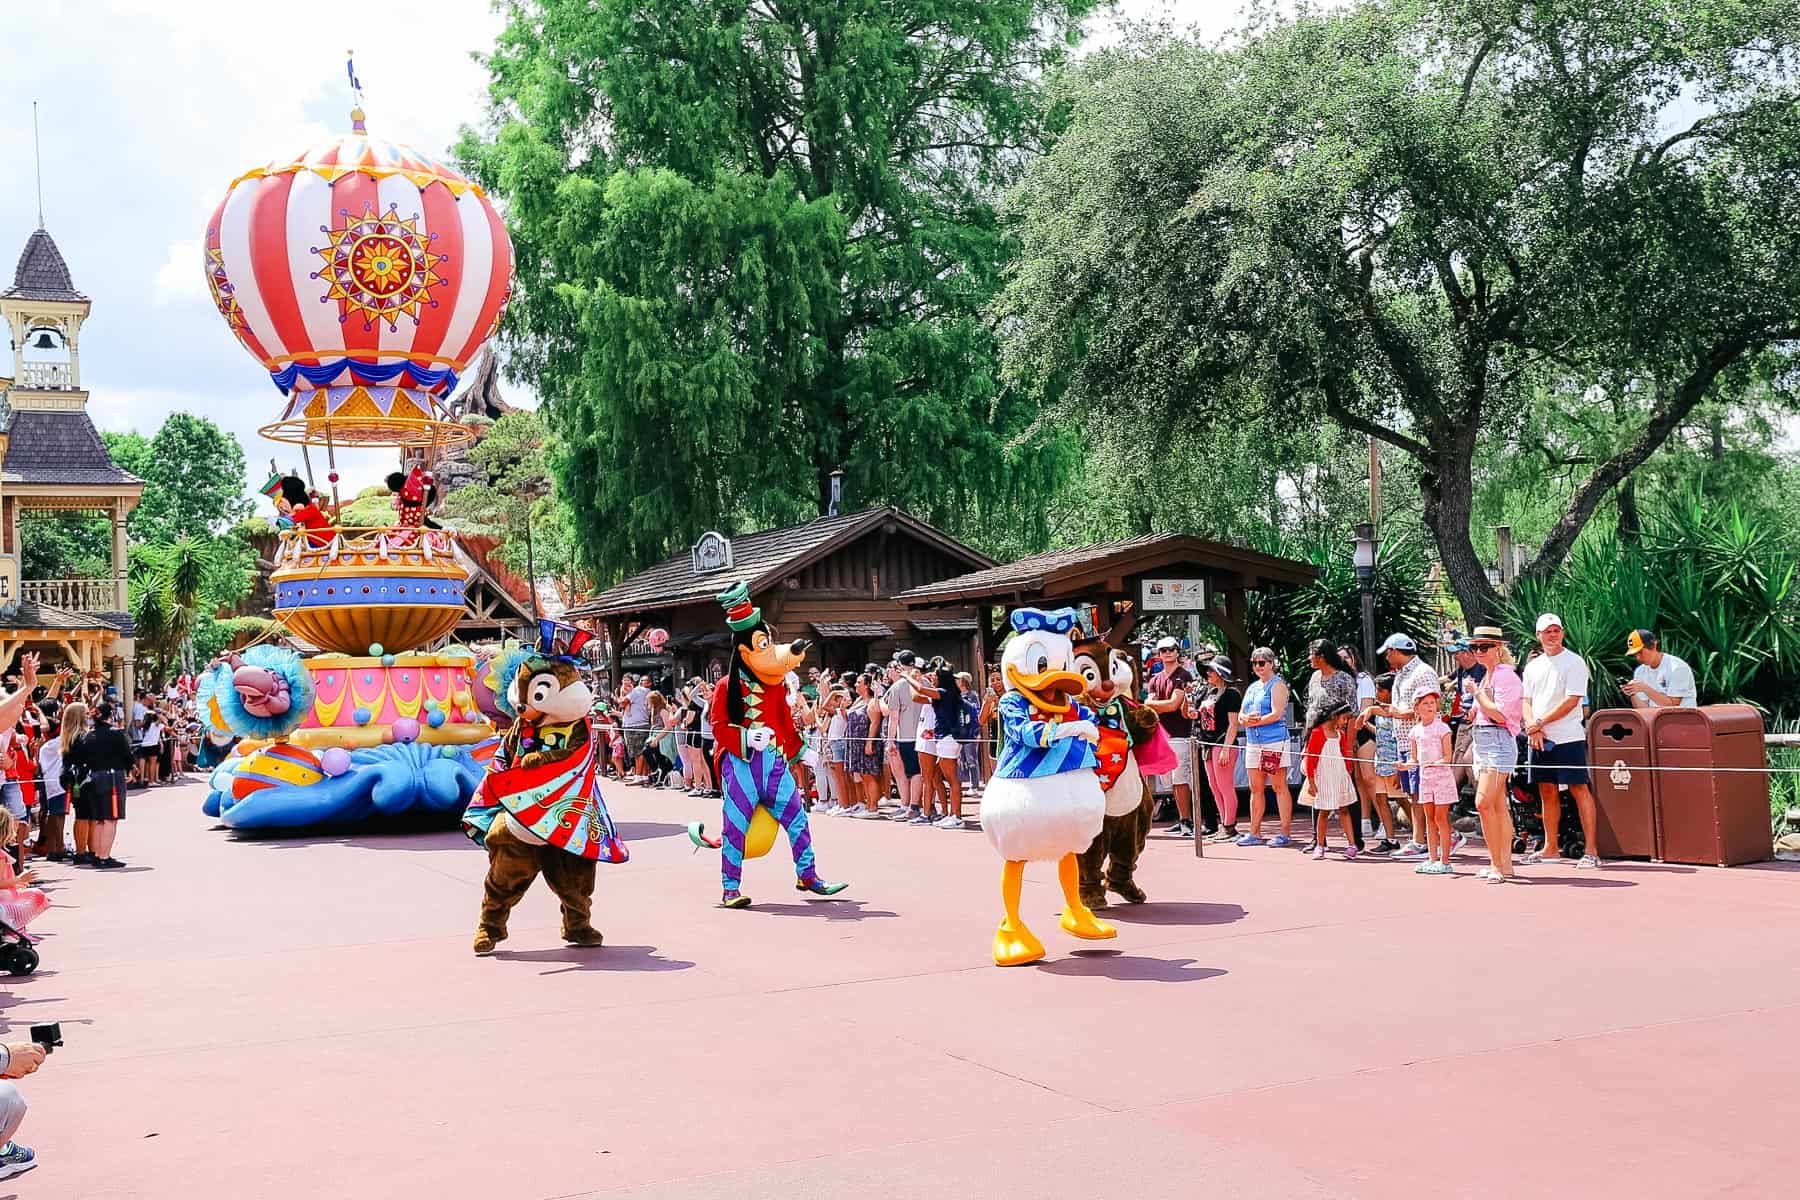 Donald Duck with other walking characters in the parade. 